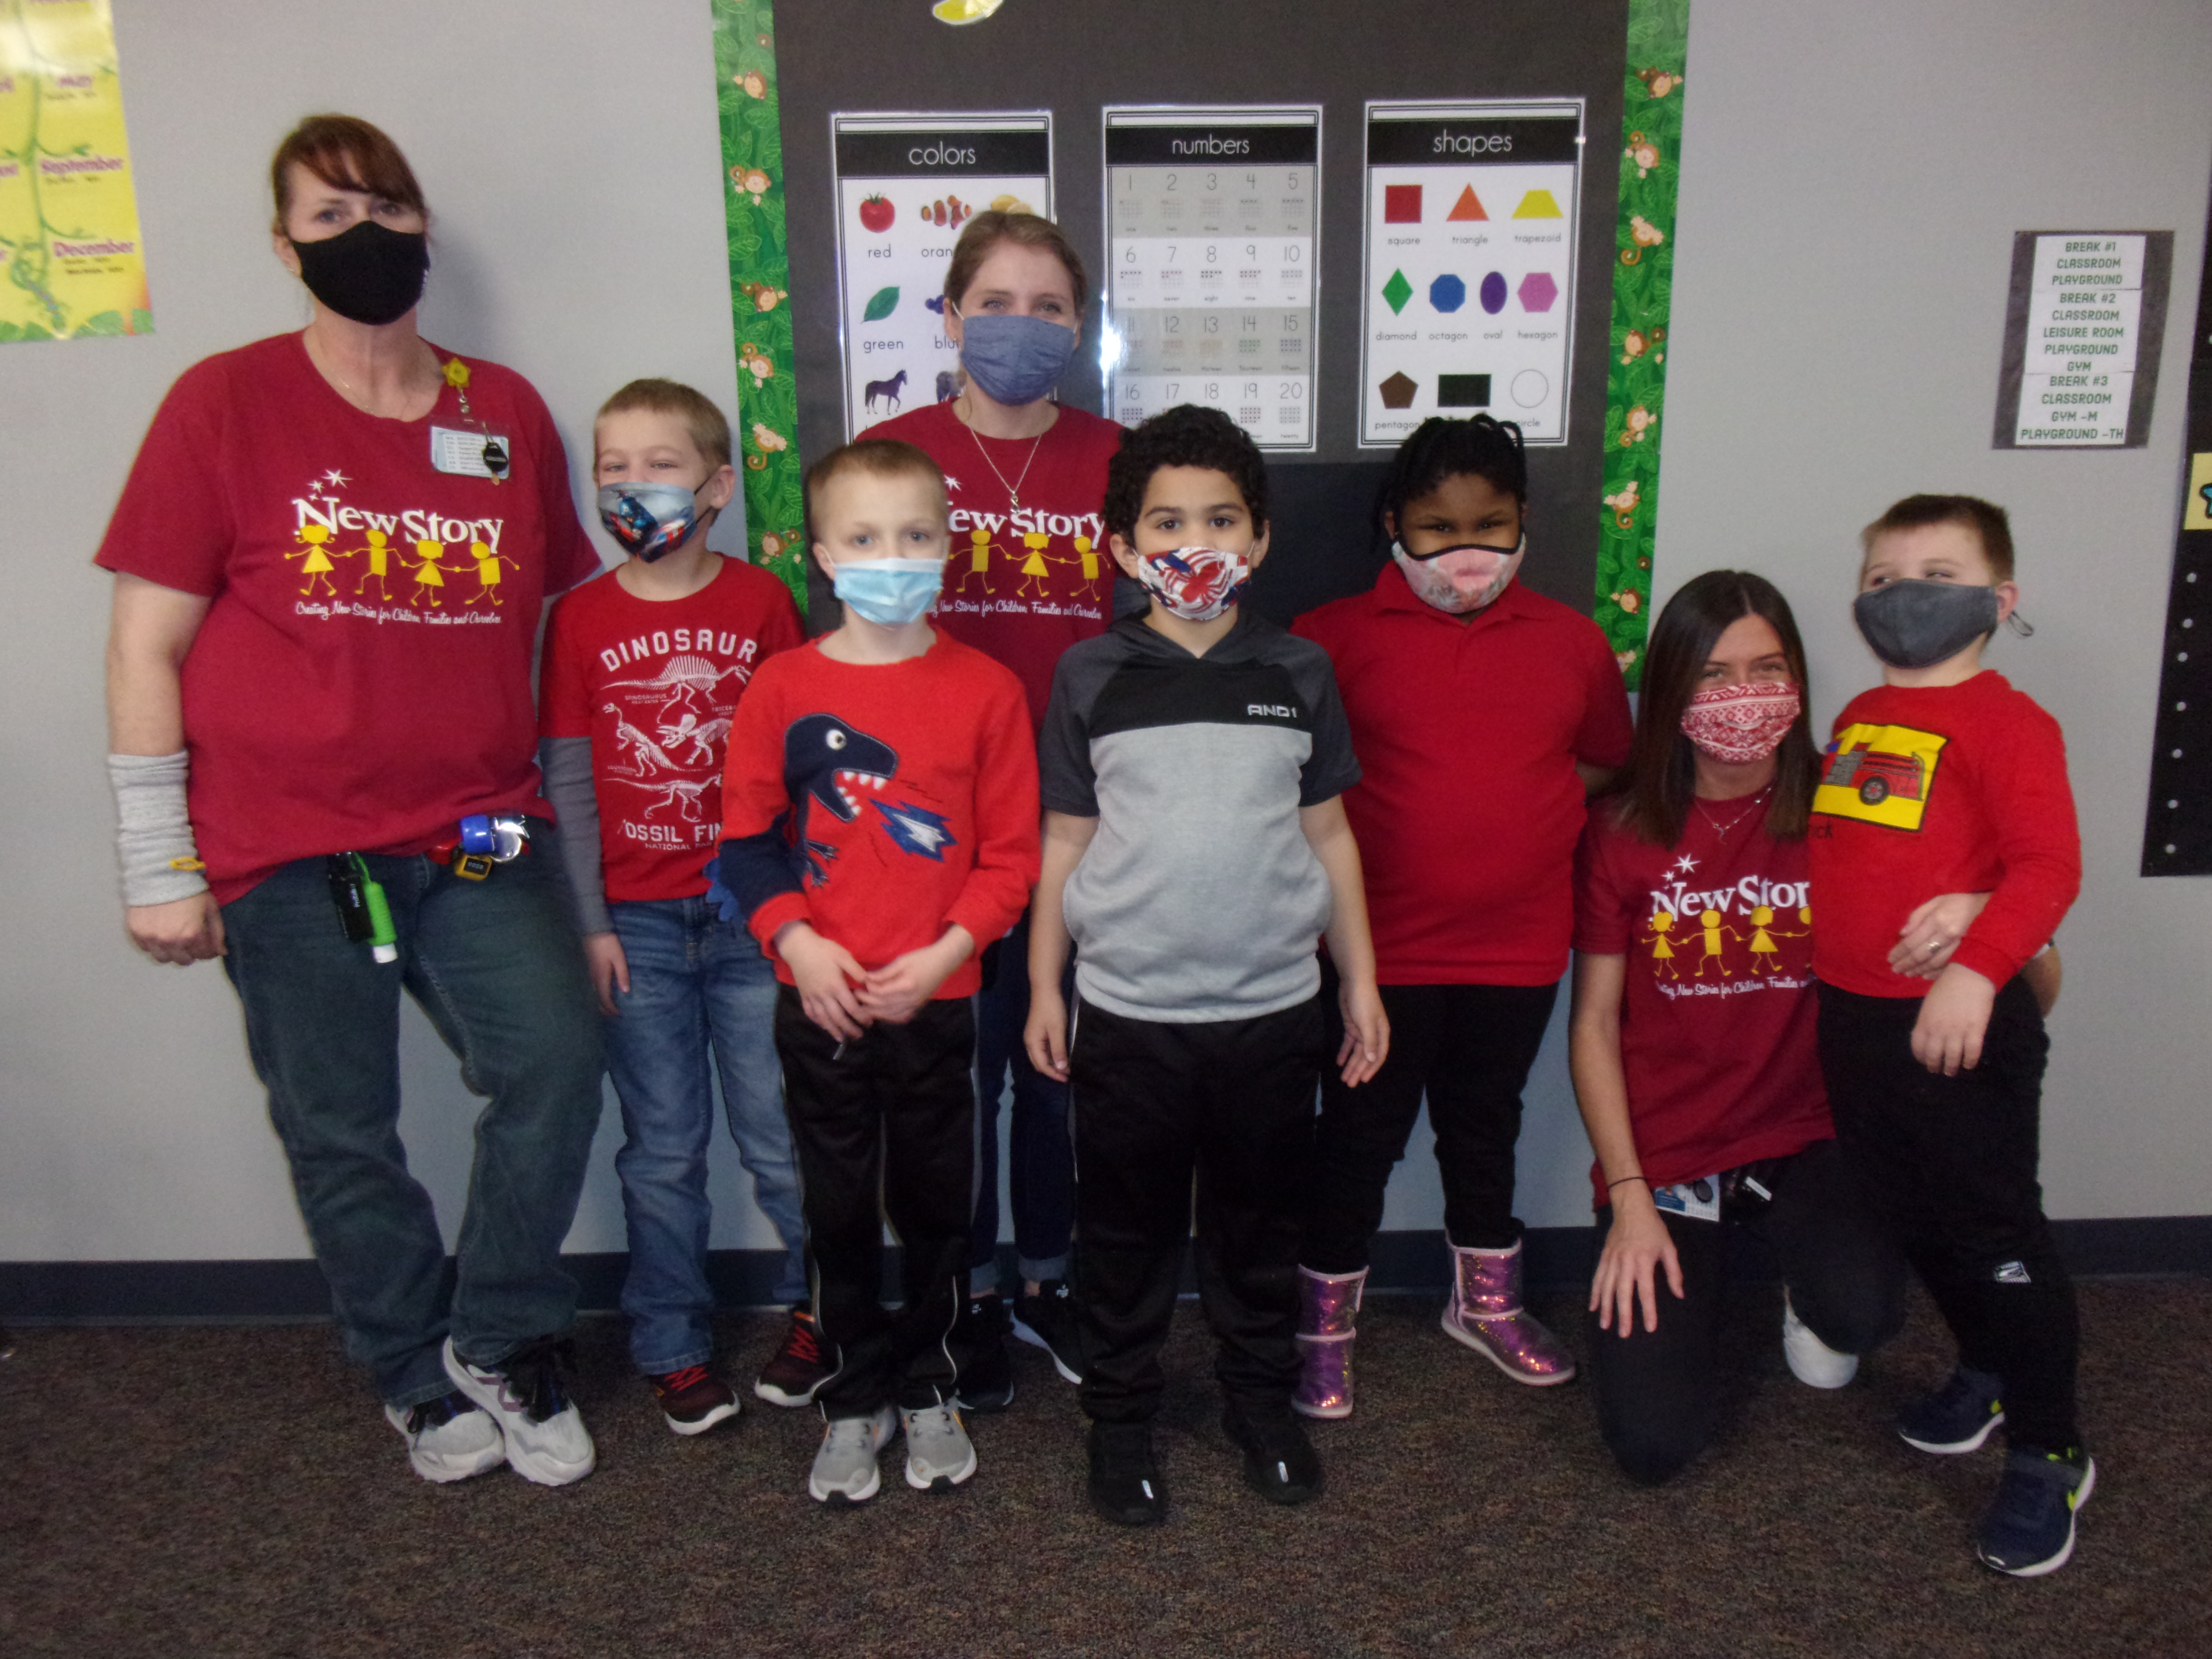 Students and staff dressed in shades of red stand in front of a bulletin board.